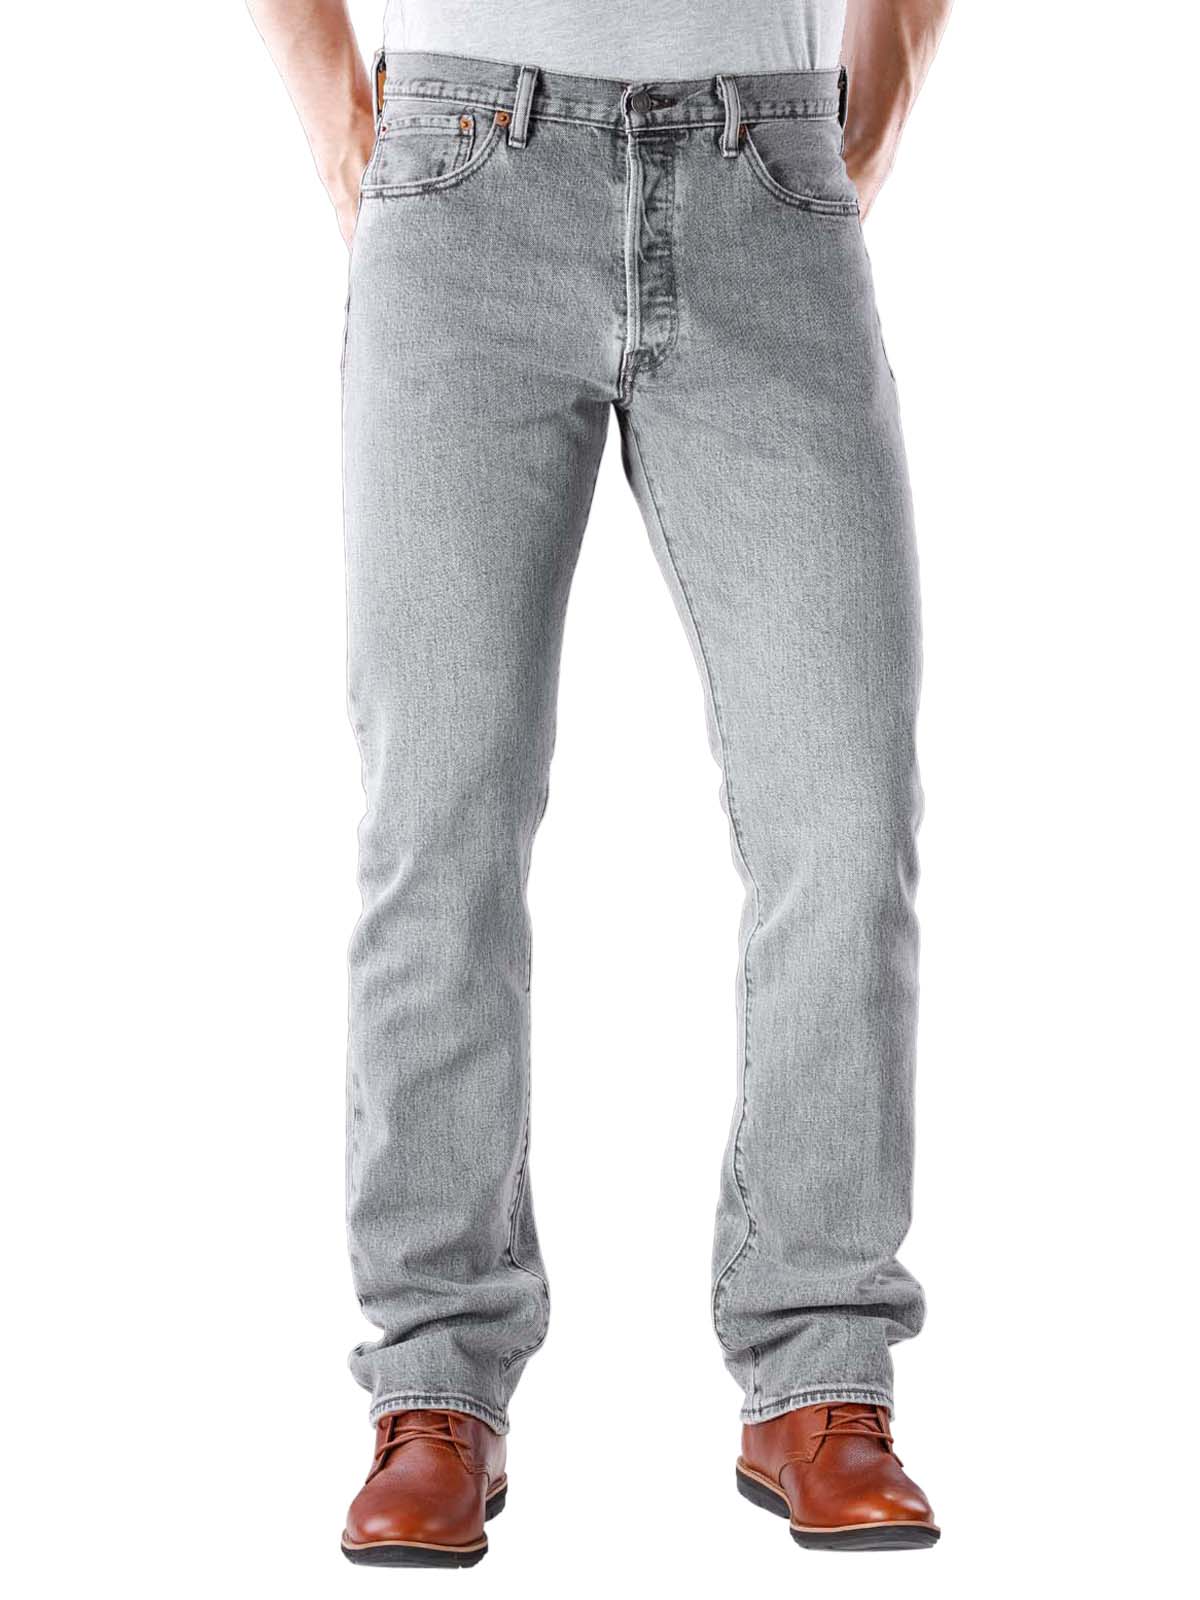 Levi's 501 Jeans direnzo stretch Levi's Men's Jeans | Free Shipping on   - SIMPLY LOOK GOOD